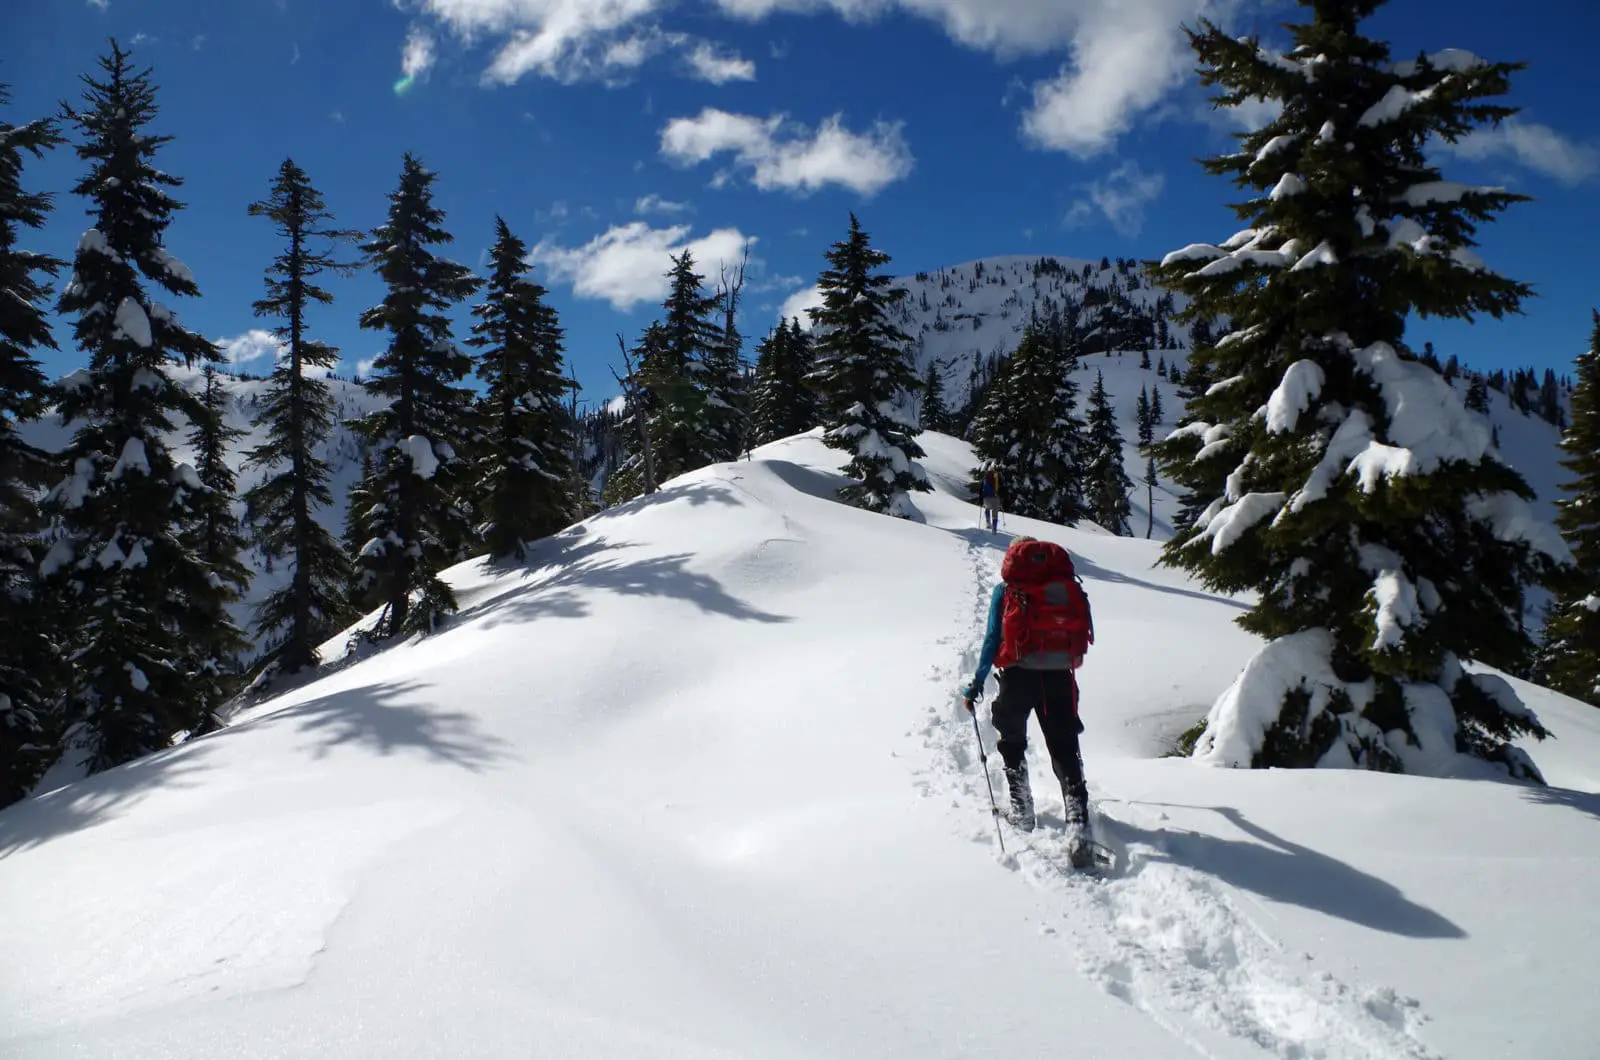 Using snowshoes and poles to climb to Iago Peak - Photo: Tim Gage (CC)